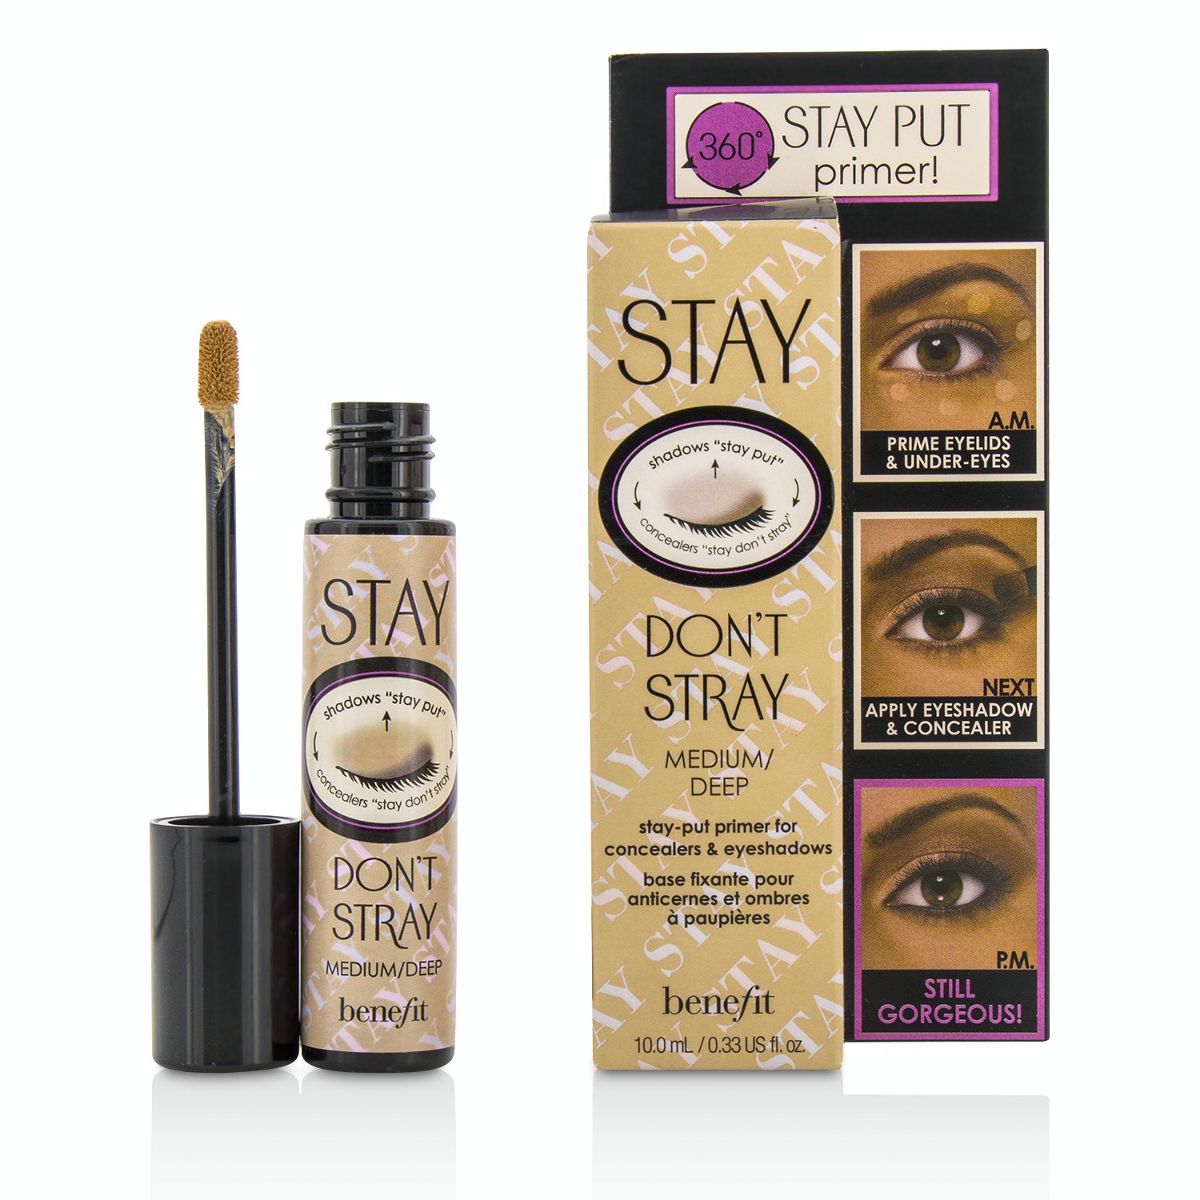 Stay Dont Stray (Stay Put Primer for Concealers  Eyeshadows) - Medium/Deep Benefit Image